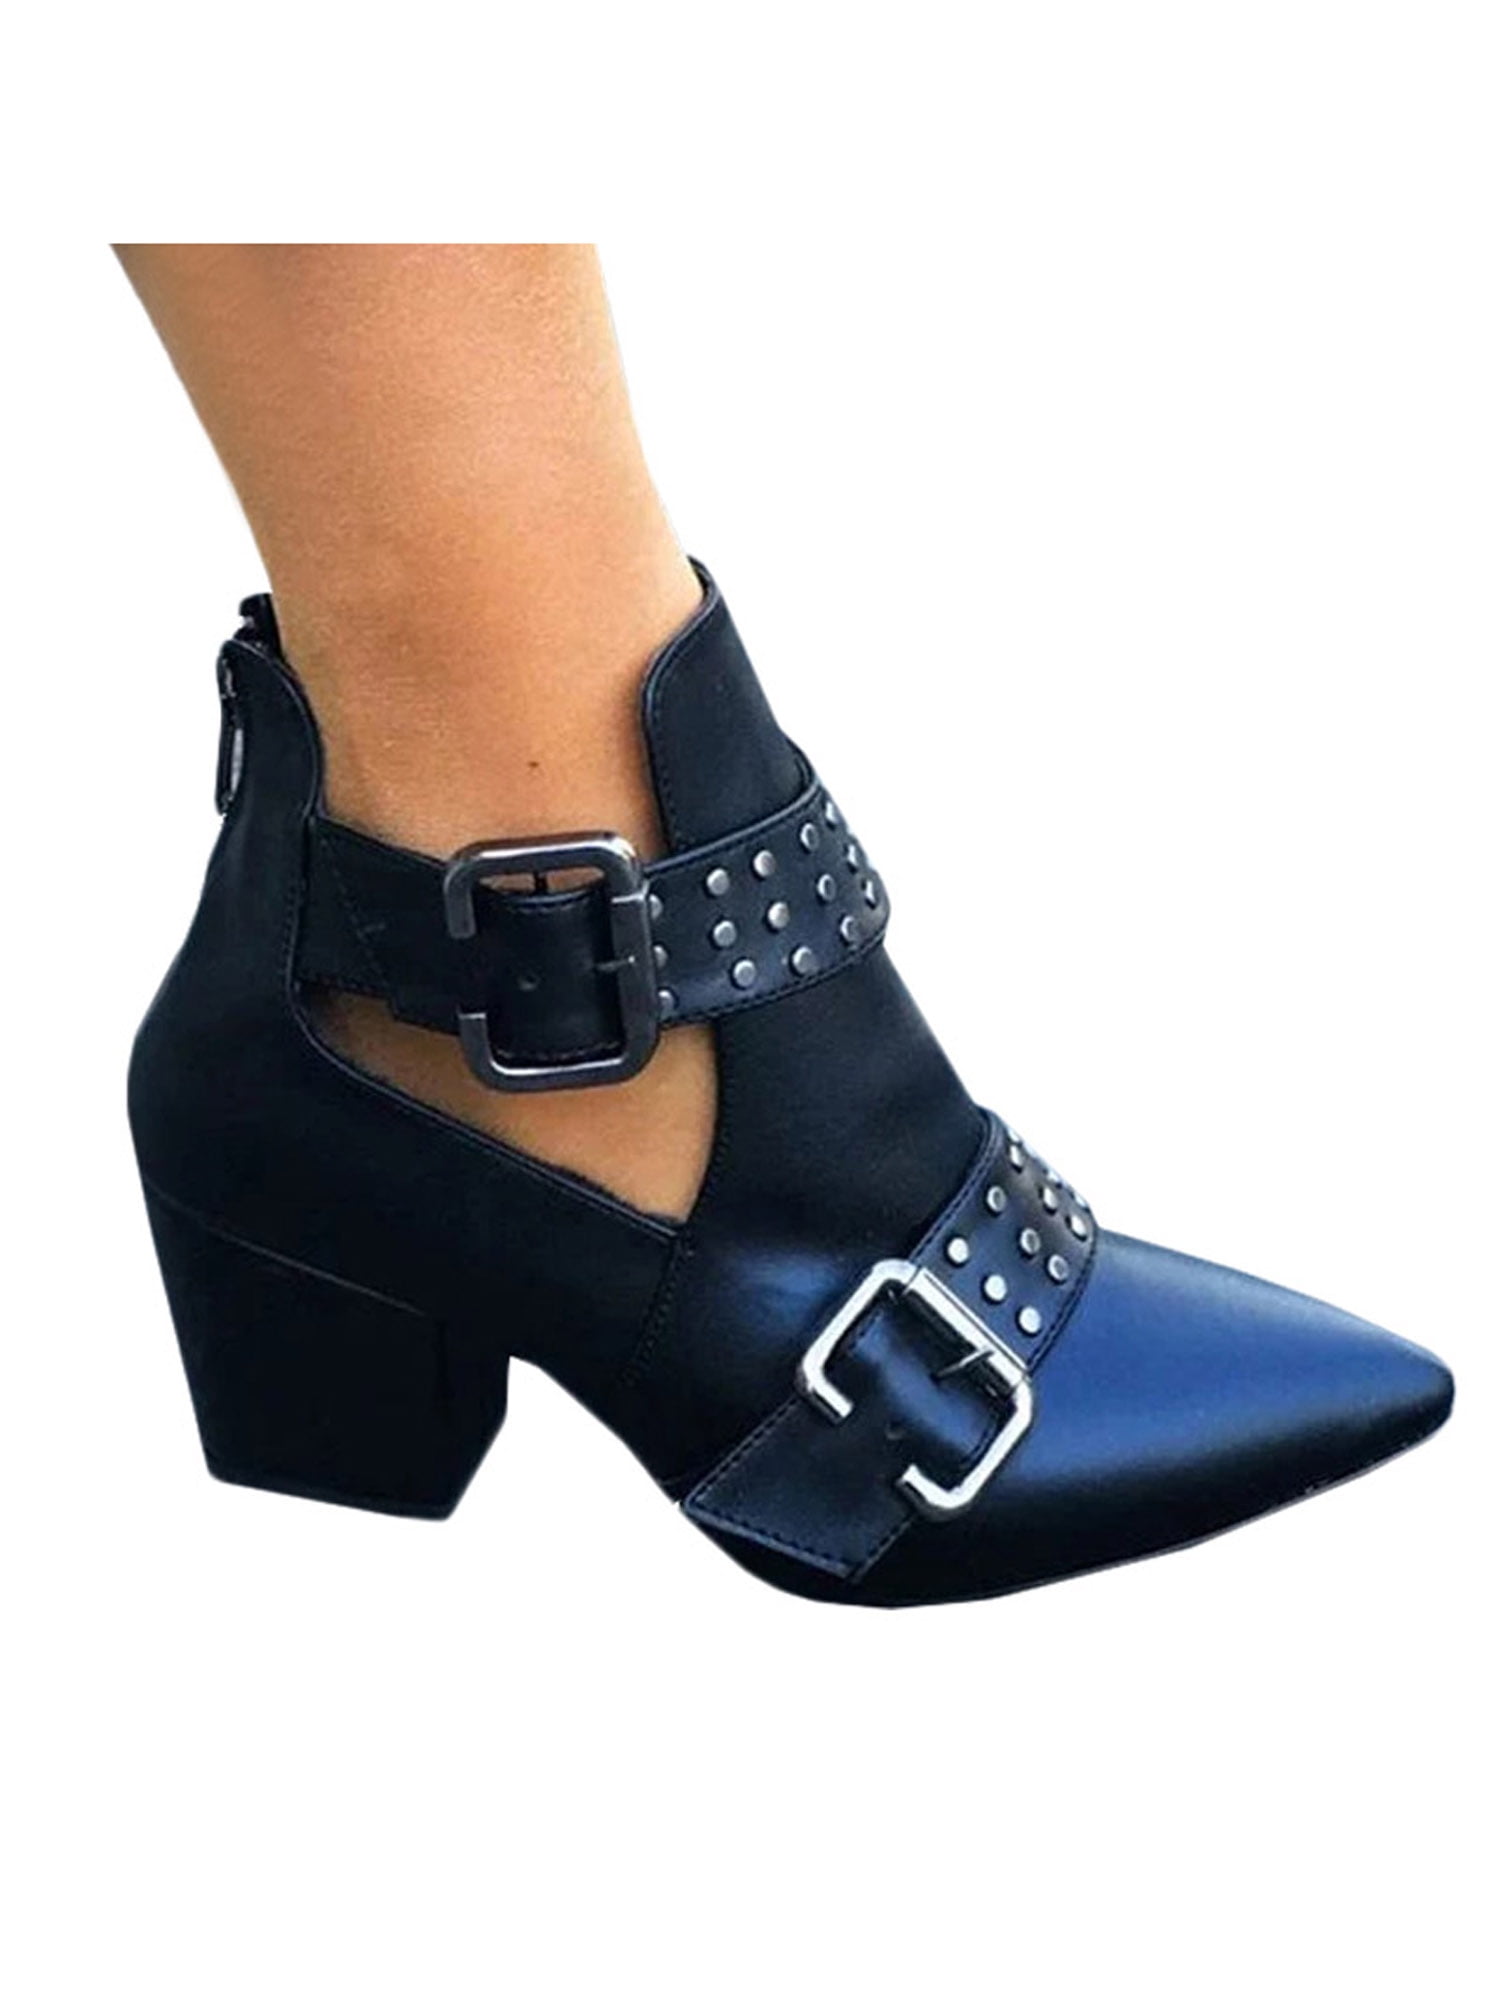 Details about   Womens Shoes Synthetic Leather Med Heels Buckle Ankle Boots US Size 4-15 JF00 